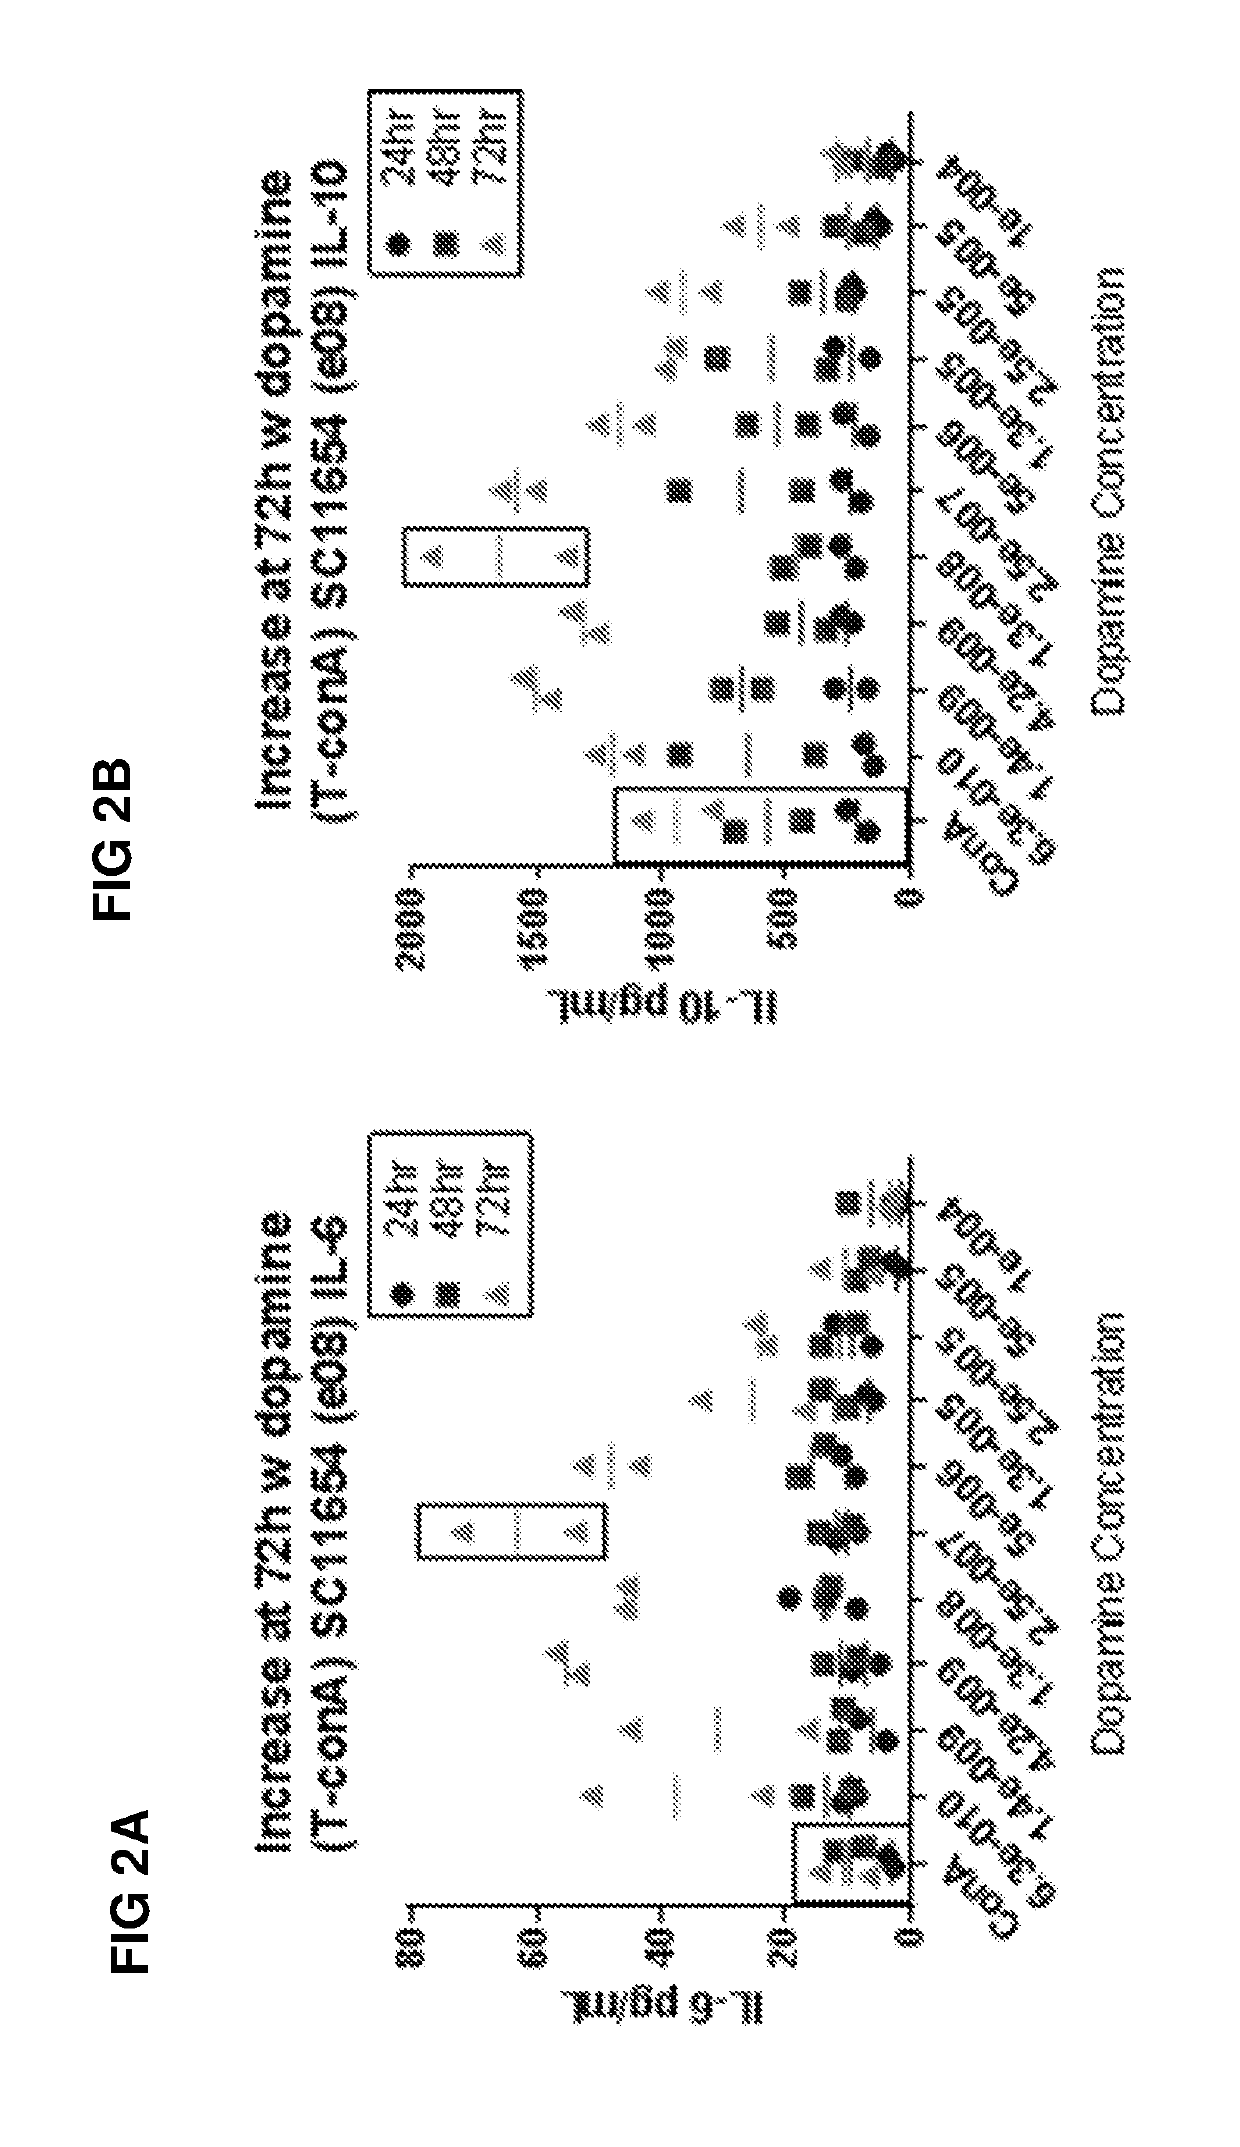 Neuromodulating compositions and related therapeutic methods for the treatment of cancer by modulating an Anti-cancer immune response